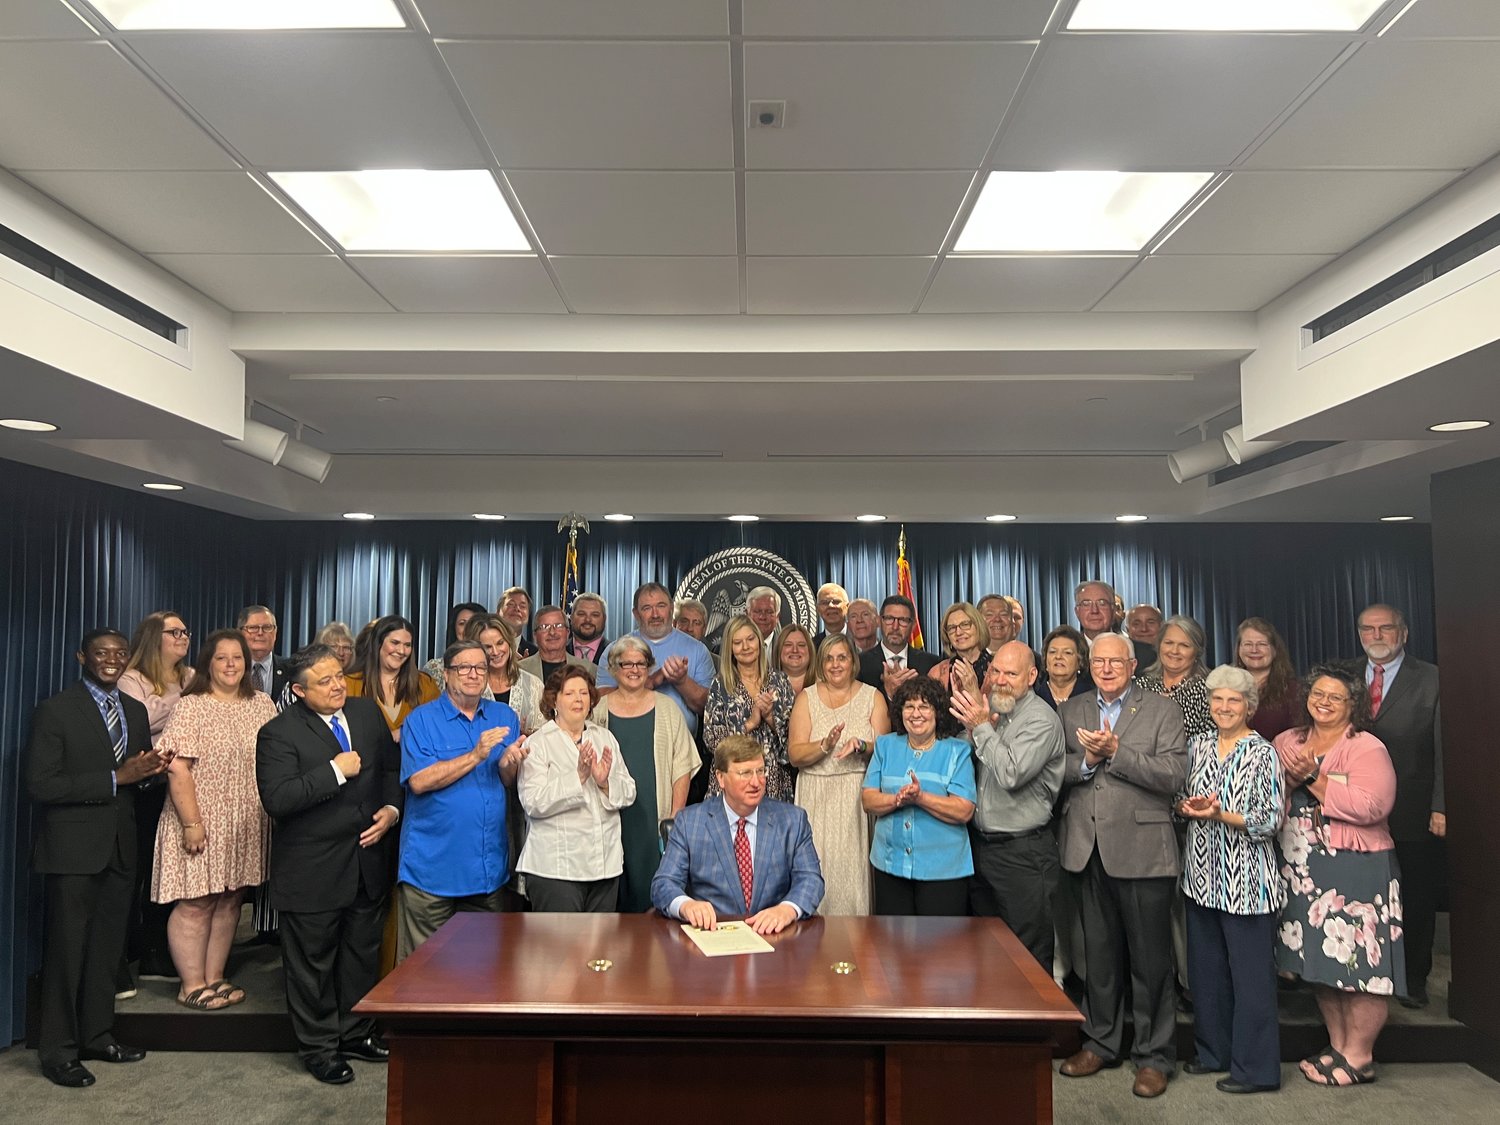 Gov. Tate Reeves proclaims May 12 as "The Baptist Children's Village Day" to recognize the legacy of the Baptist Children's Village and celebrate their 125th anniversary.